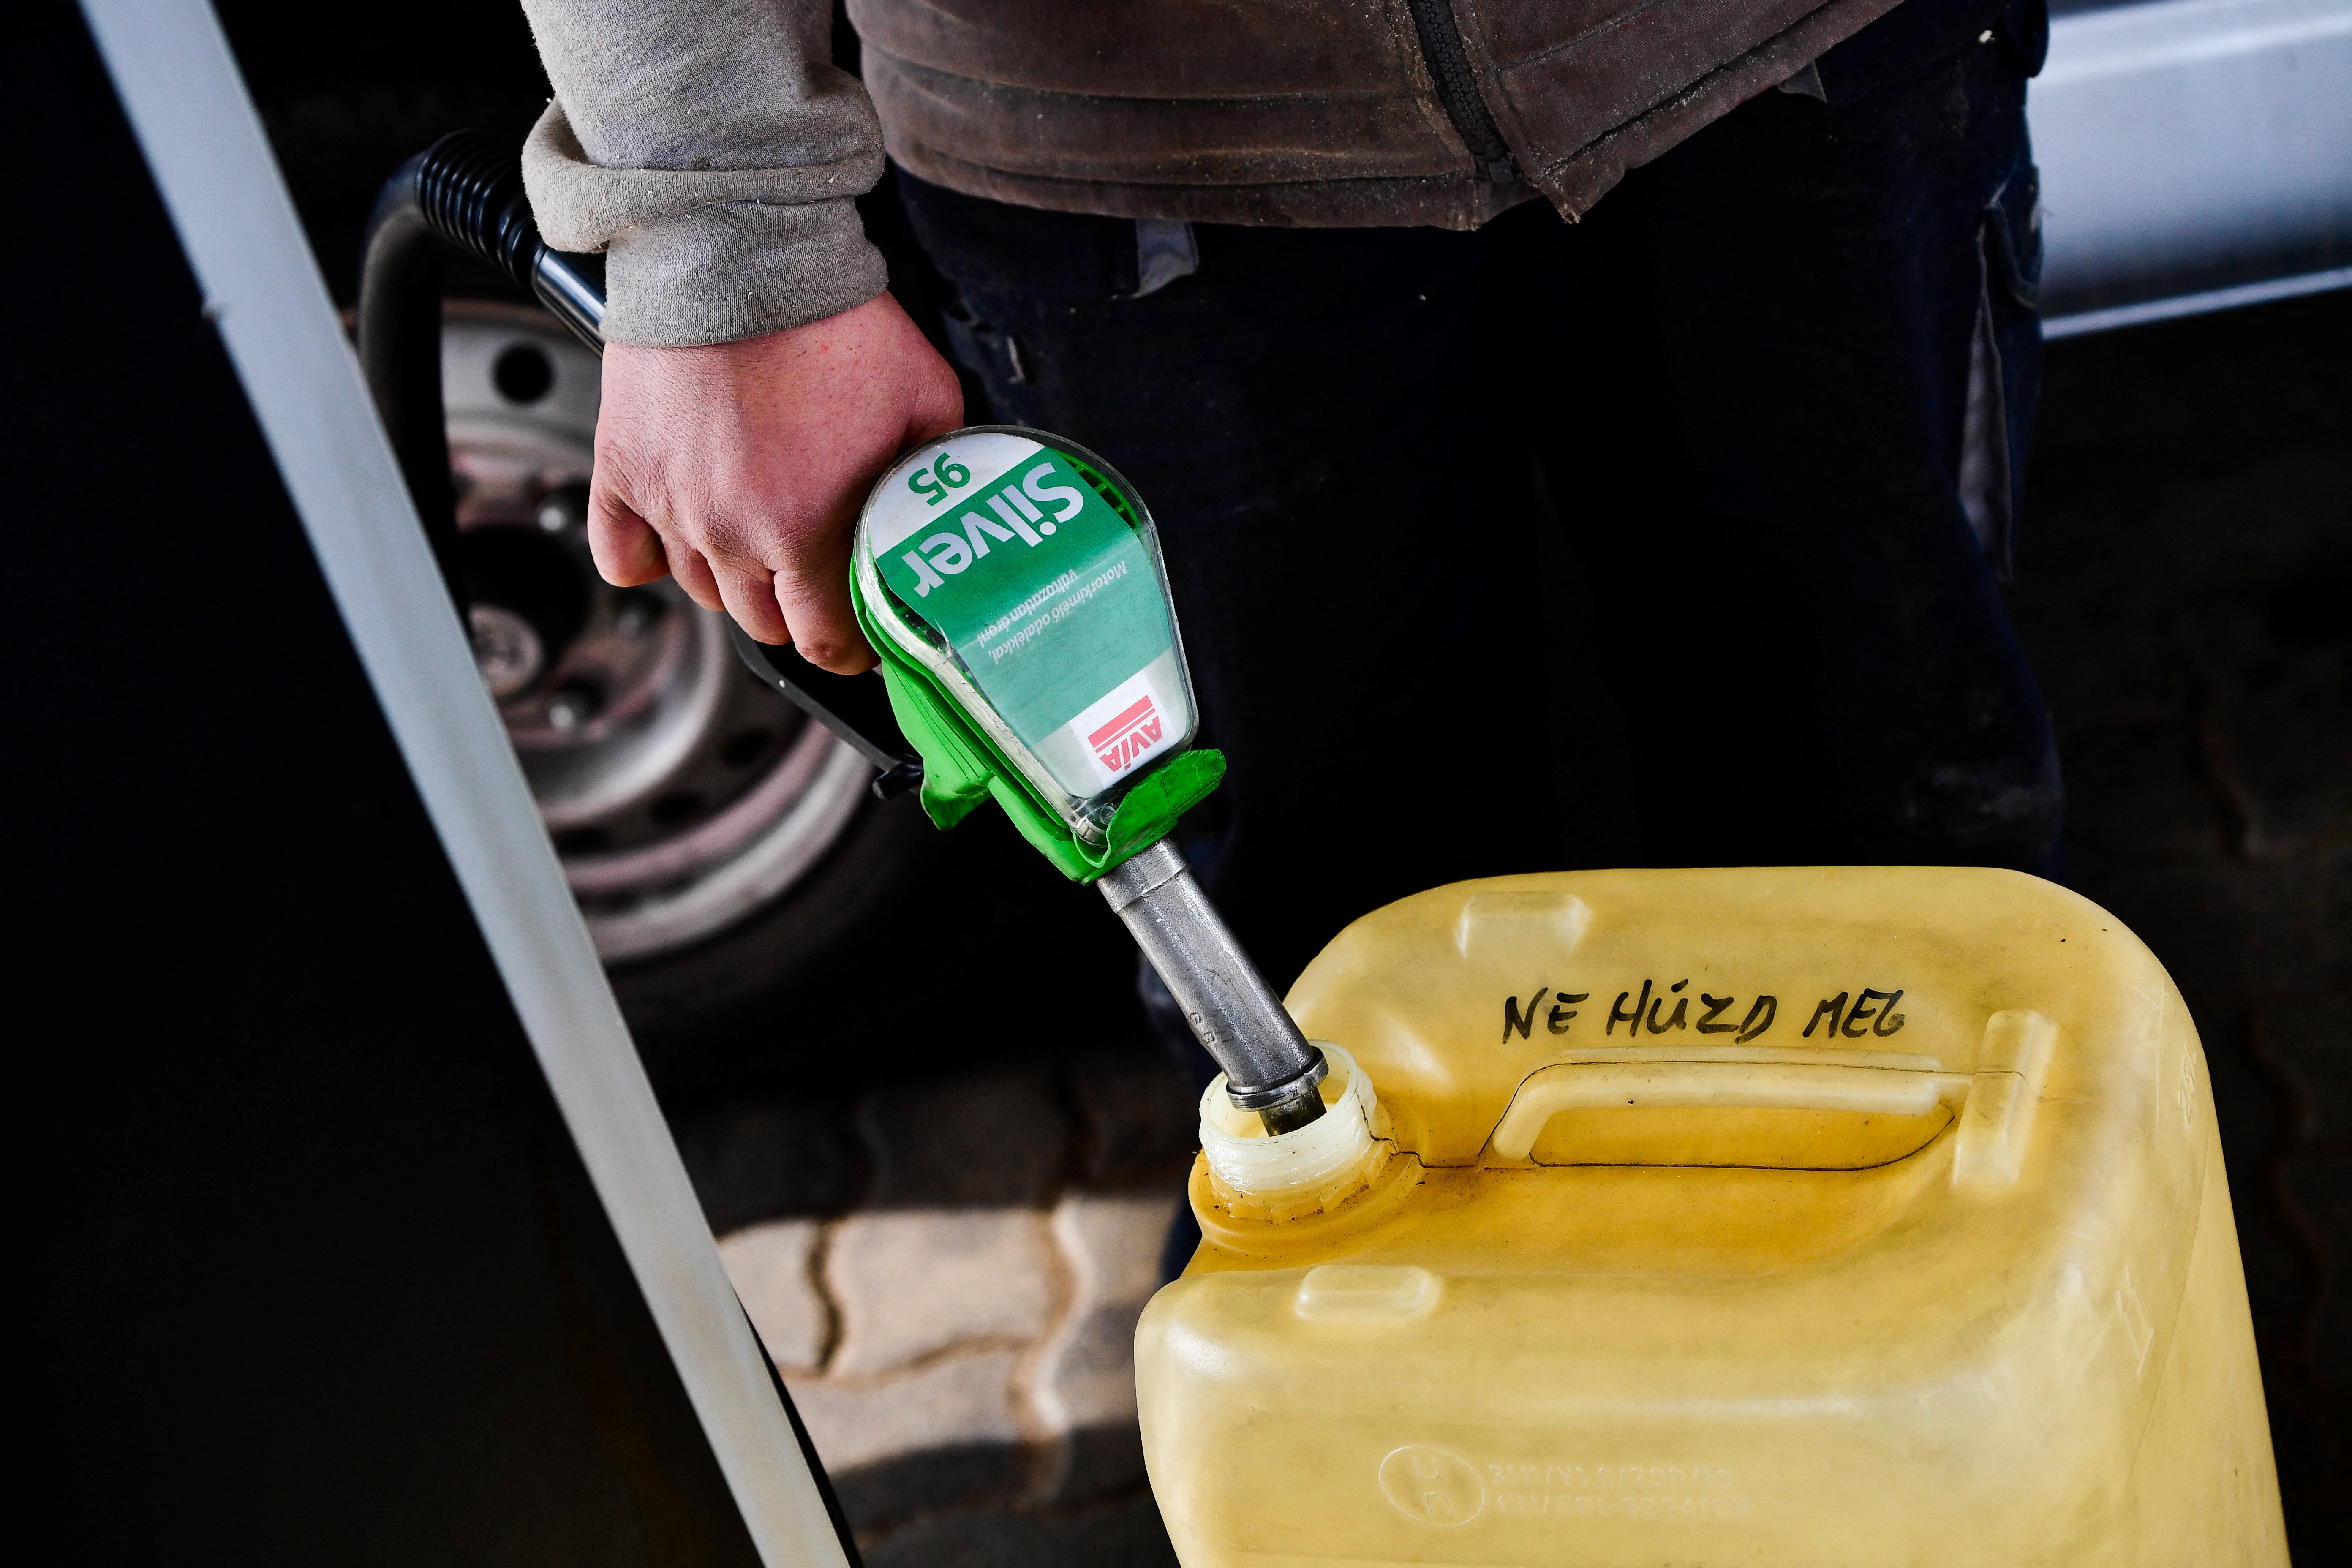 Surge in fuel and energy prices in the wake of Russia's ongoing invasion of Ukraine